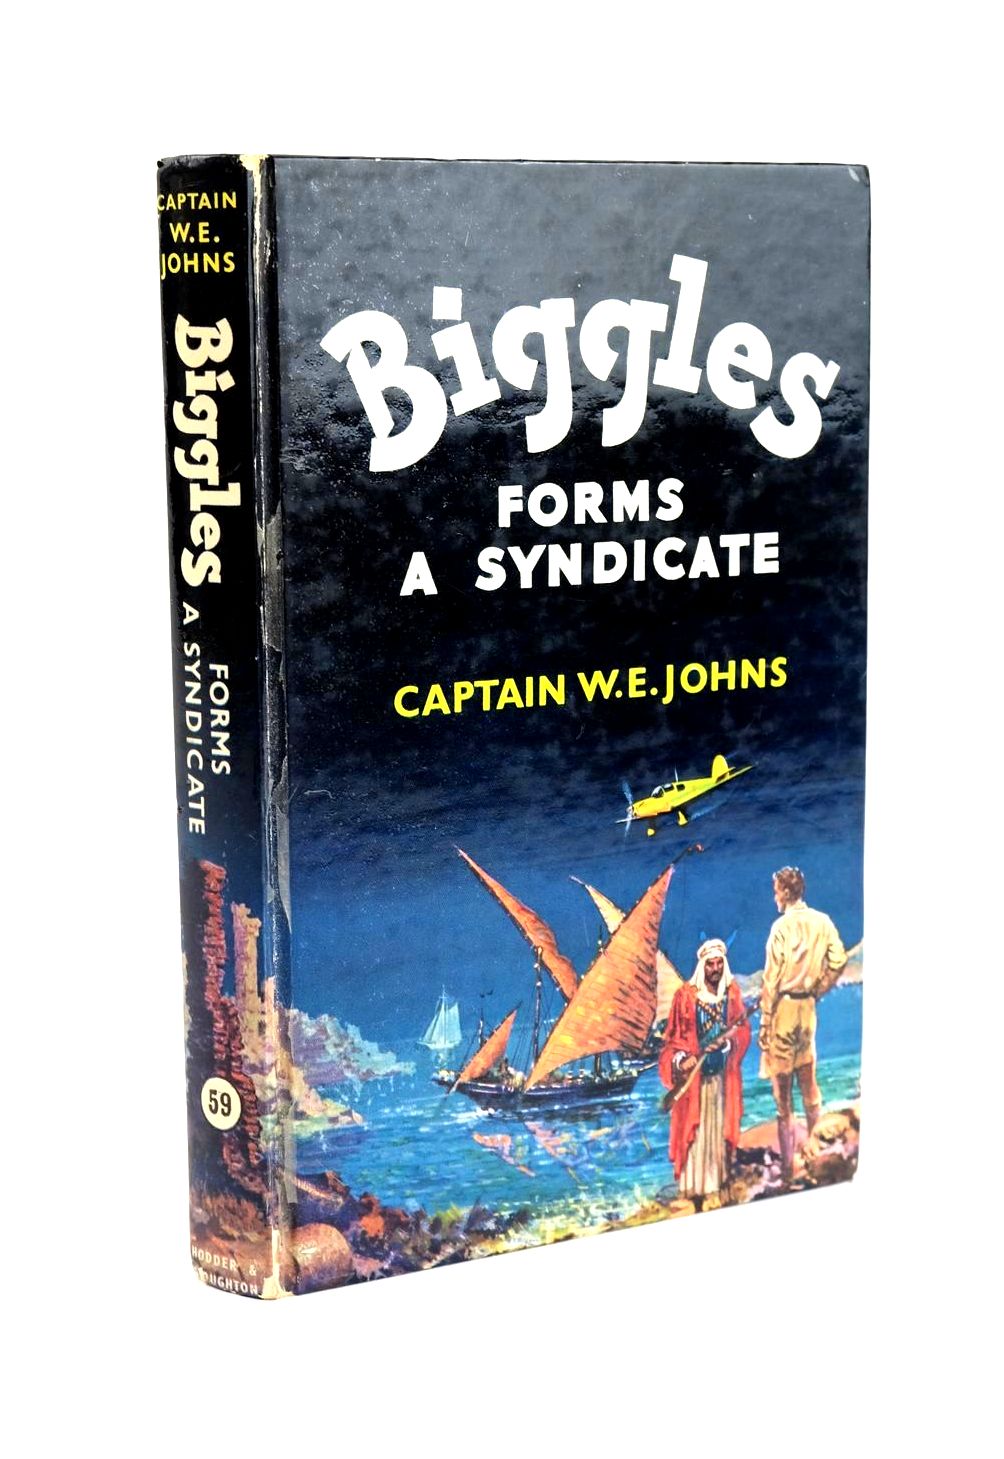 Photo of BIGGLES FORMS A SYNDICATE written by Johns, W.E. illustrated by Stead,  published by Hodder &amp; Stoughton (STOCK CODE: 1323301)  for sale by Stella & Rose's Books